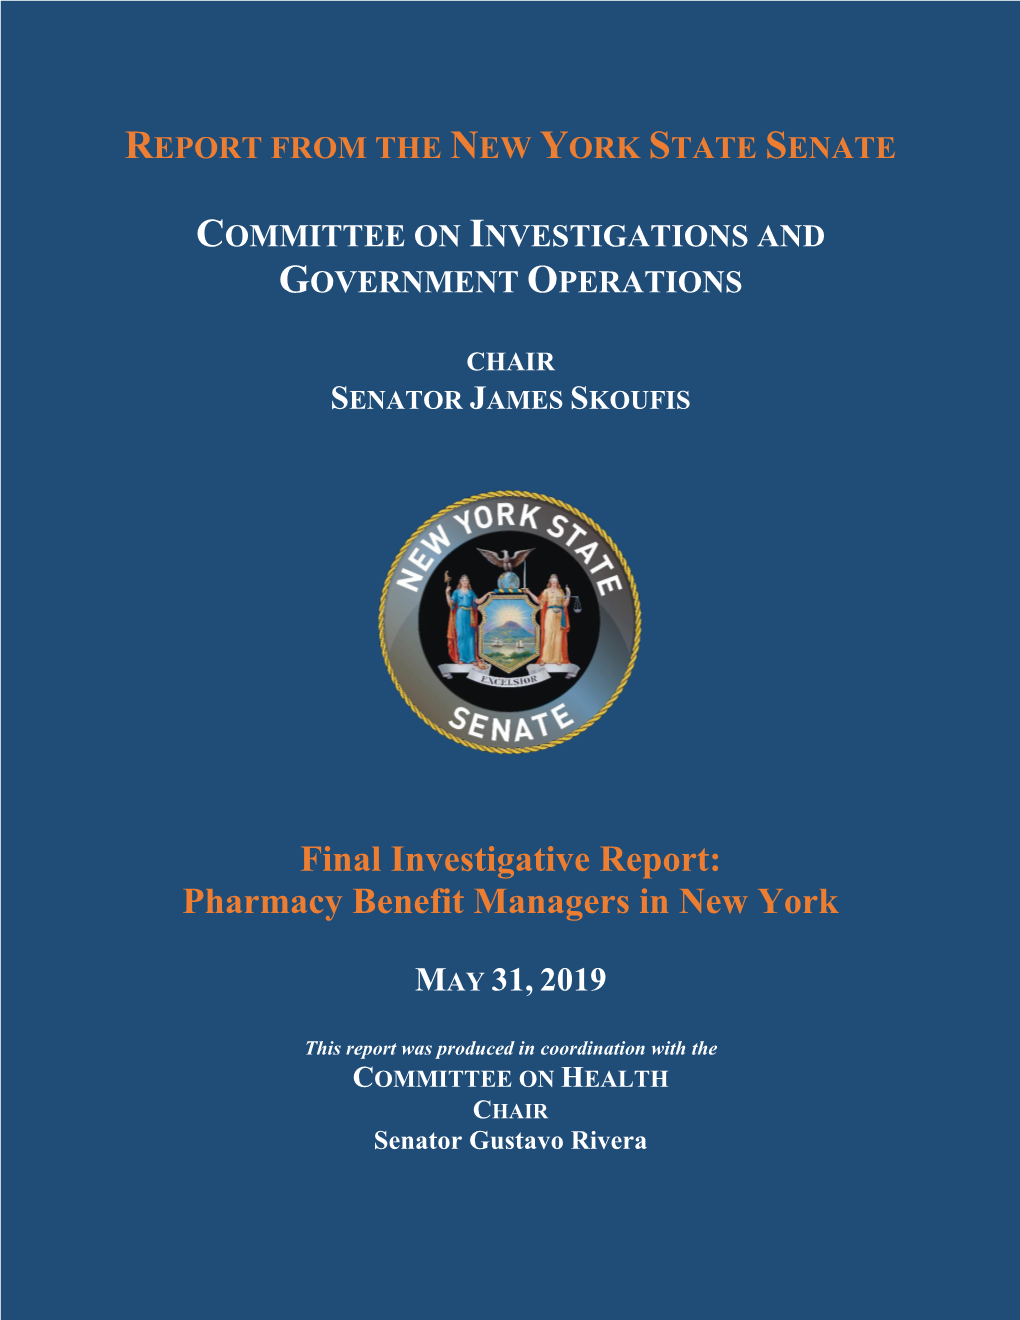 Final Investigative Report: Pharmacy Benefit Managers in New York